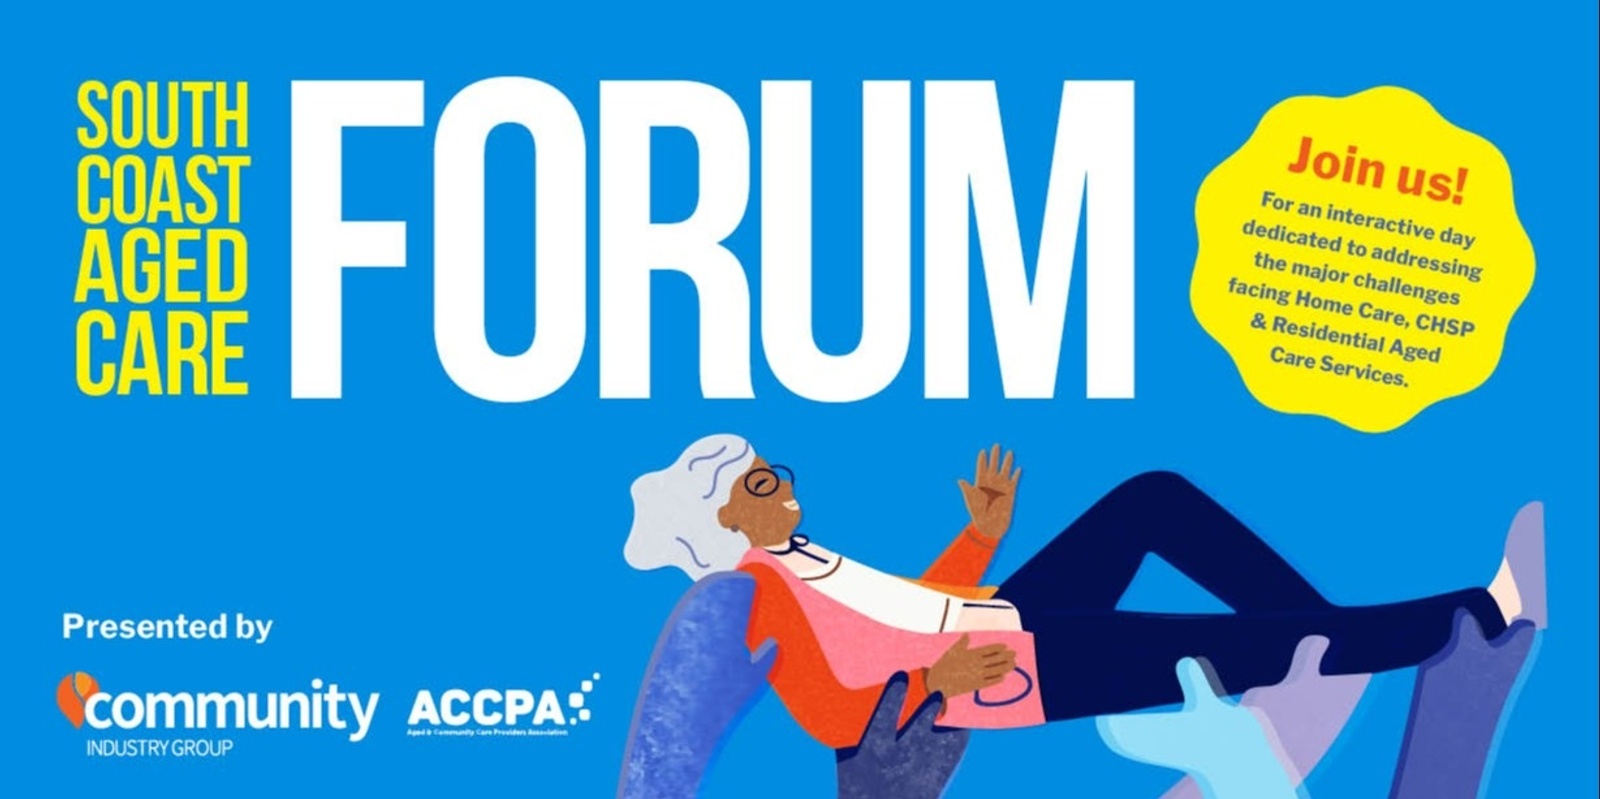 Banner image for CI Group & ACCPA South Coast Aged Care Forum